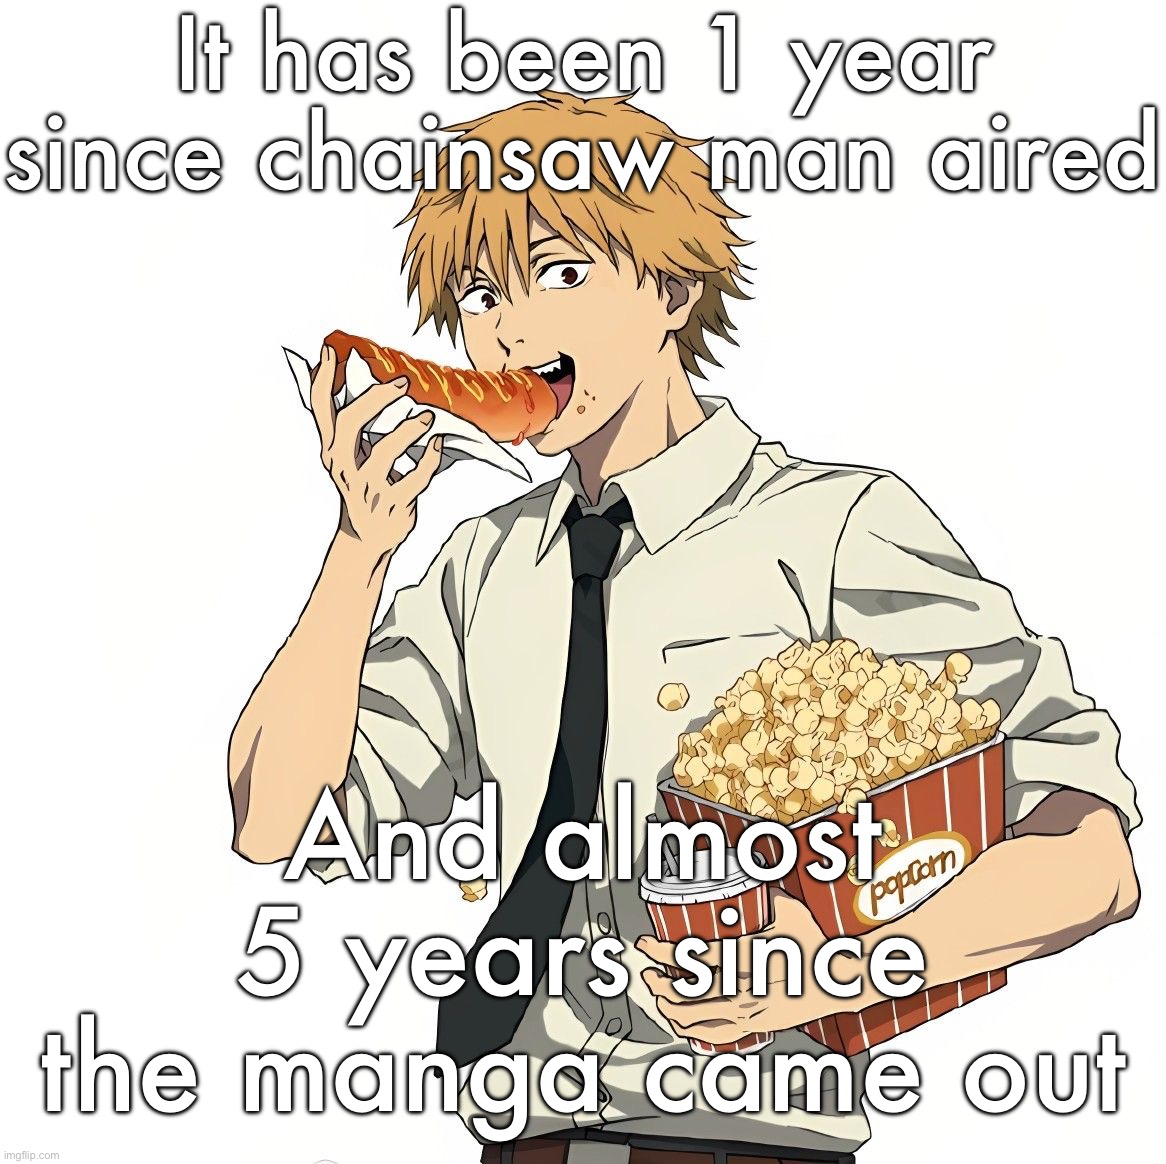 Denji | It has been 1 year since chainsaw man aired; And almost 5 years since the manga came out | image tagged in denji | made w/ Imgflip meme maker